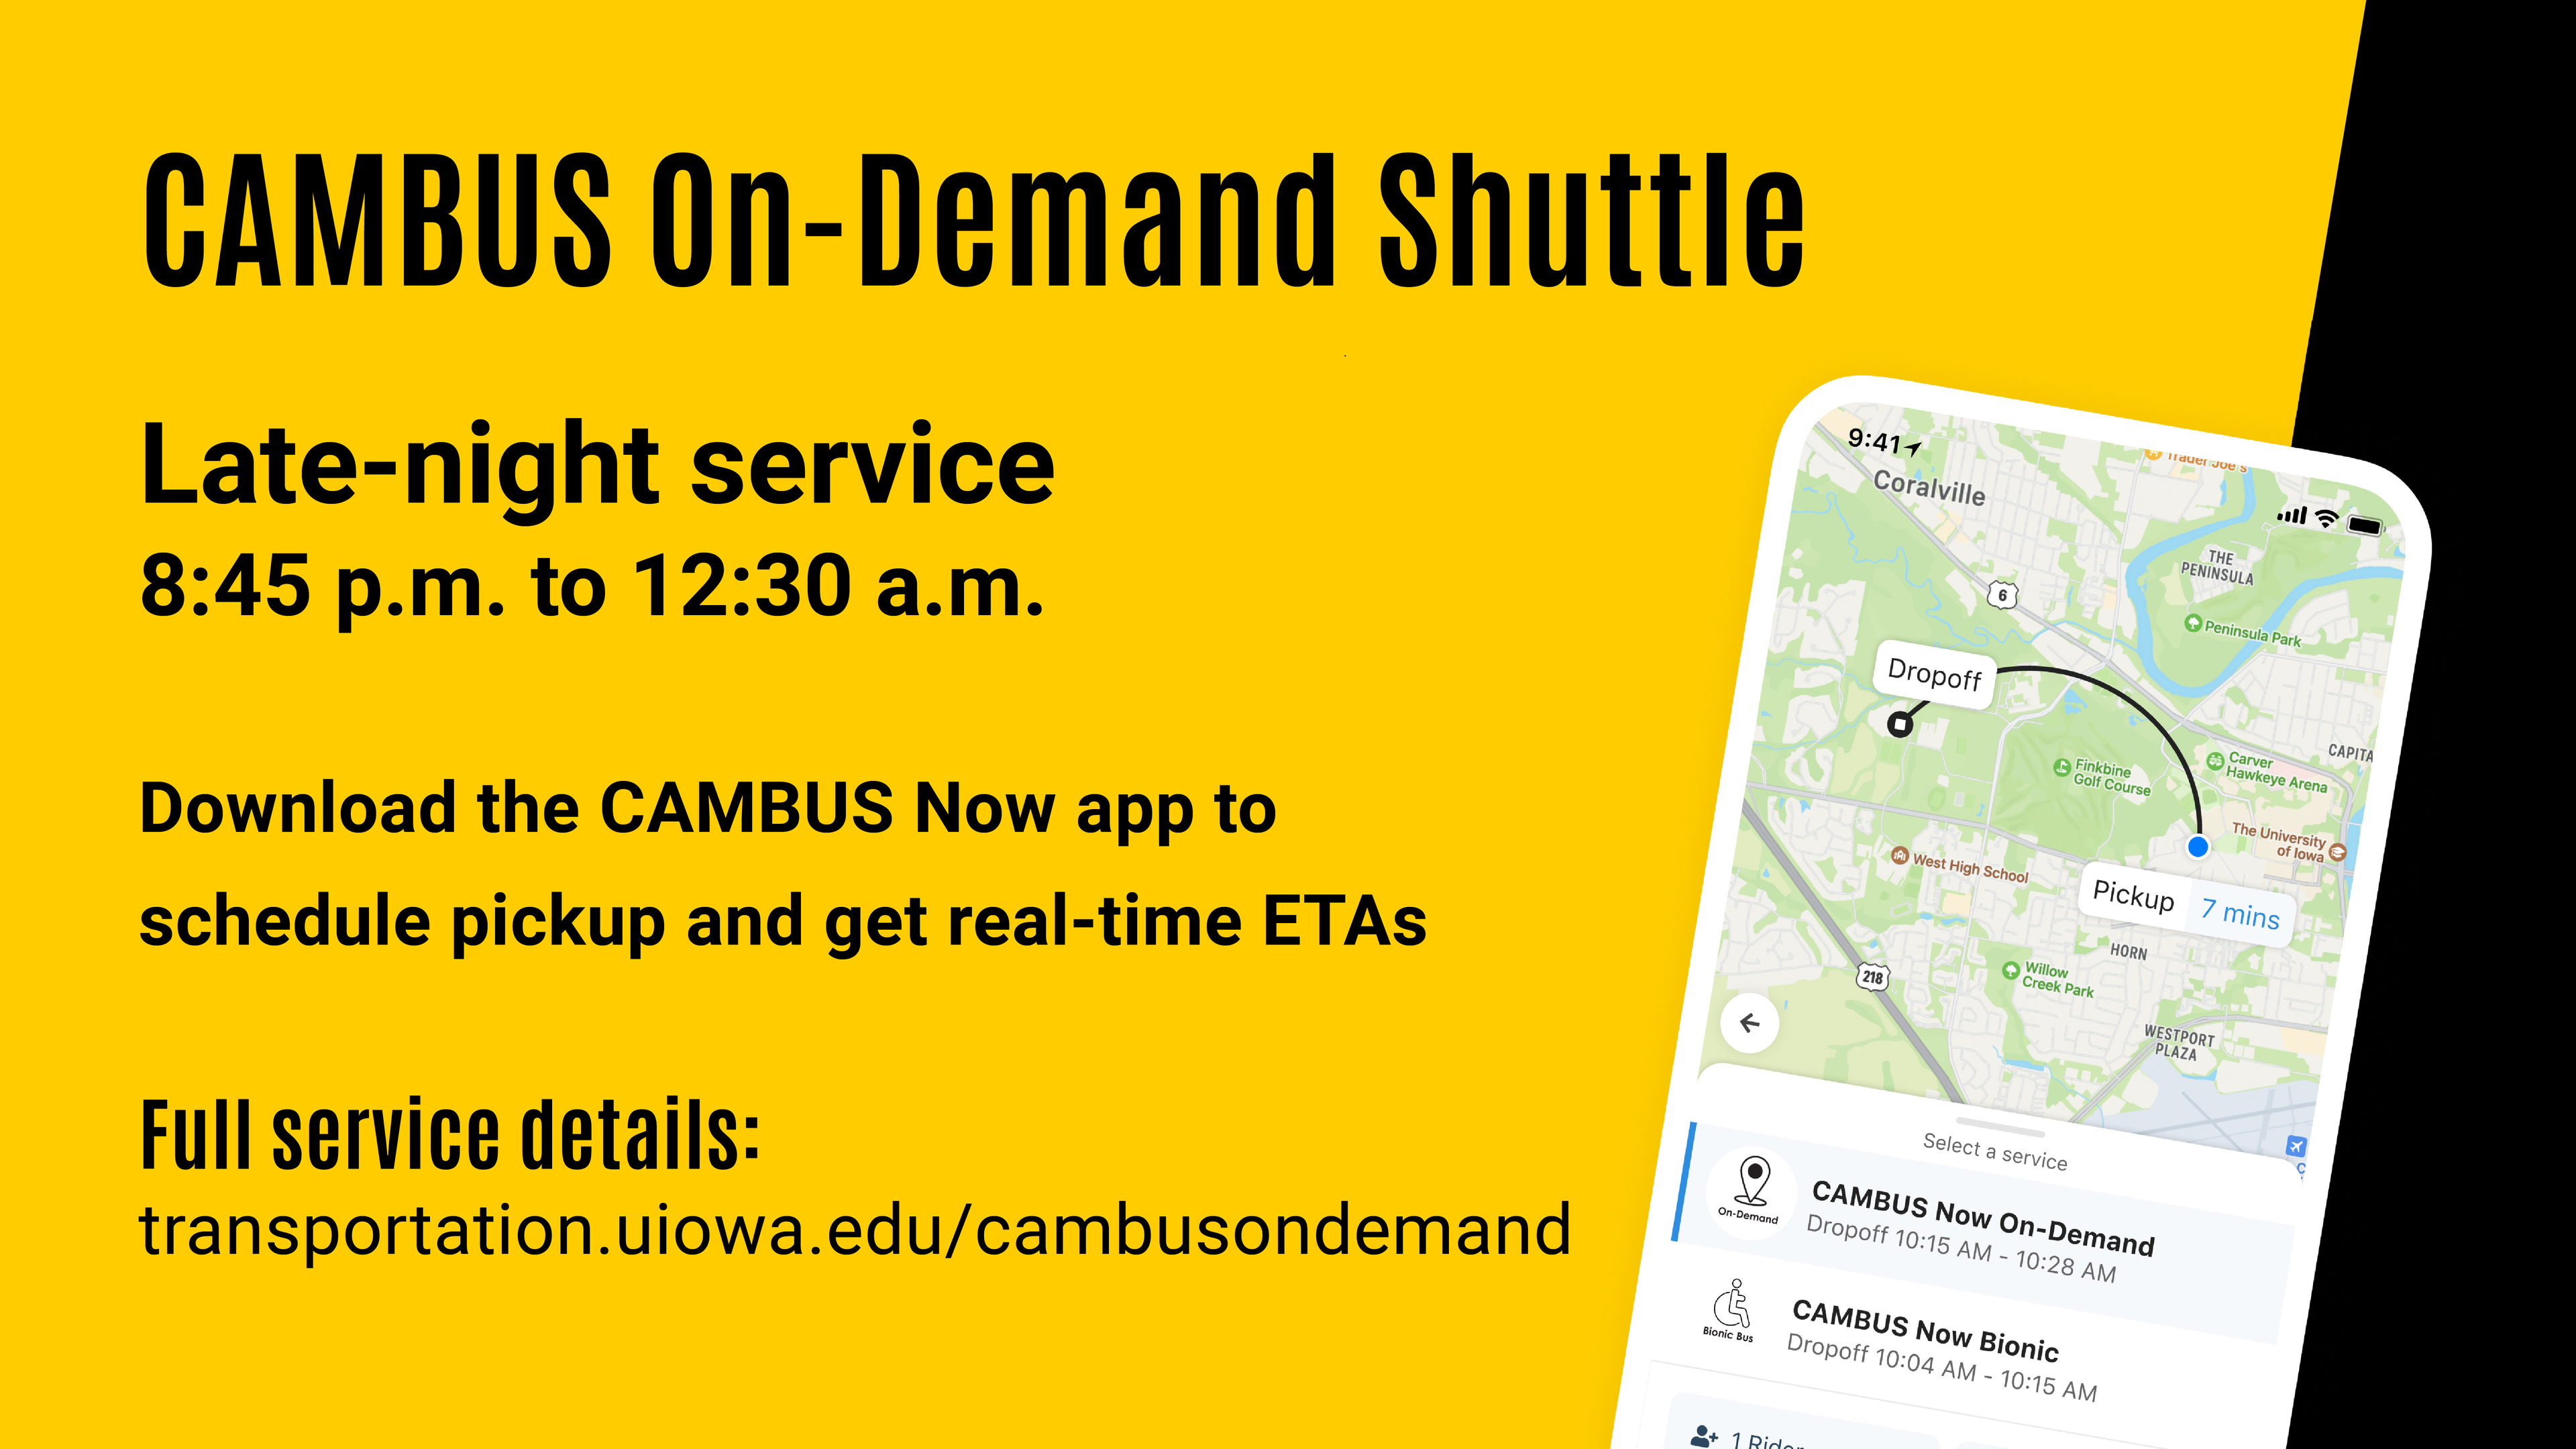 CAMBUS now late night service information